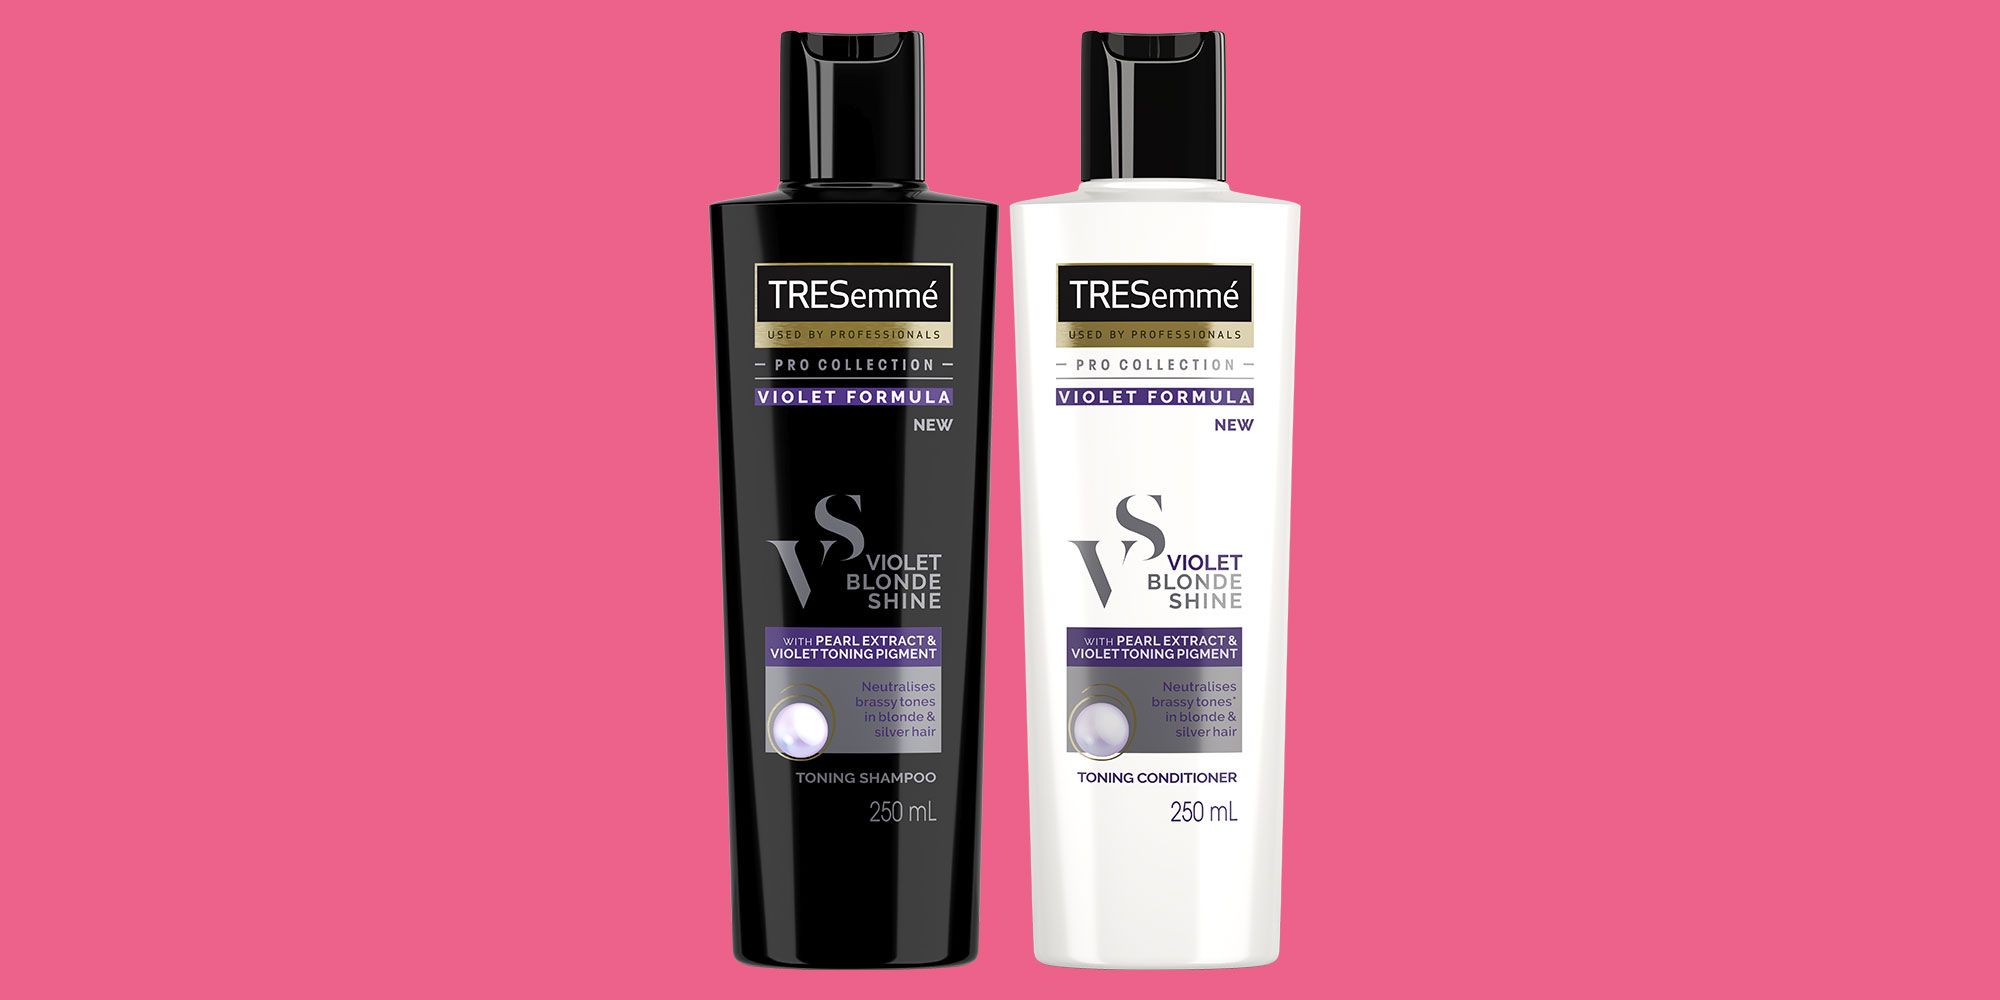 Tresemme Violet Blonde Shine Shampoo And Conditioner Review Images, Photos, Reviews